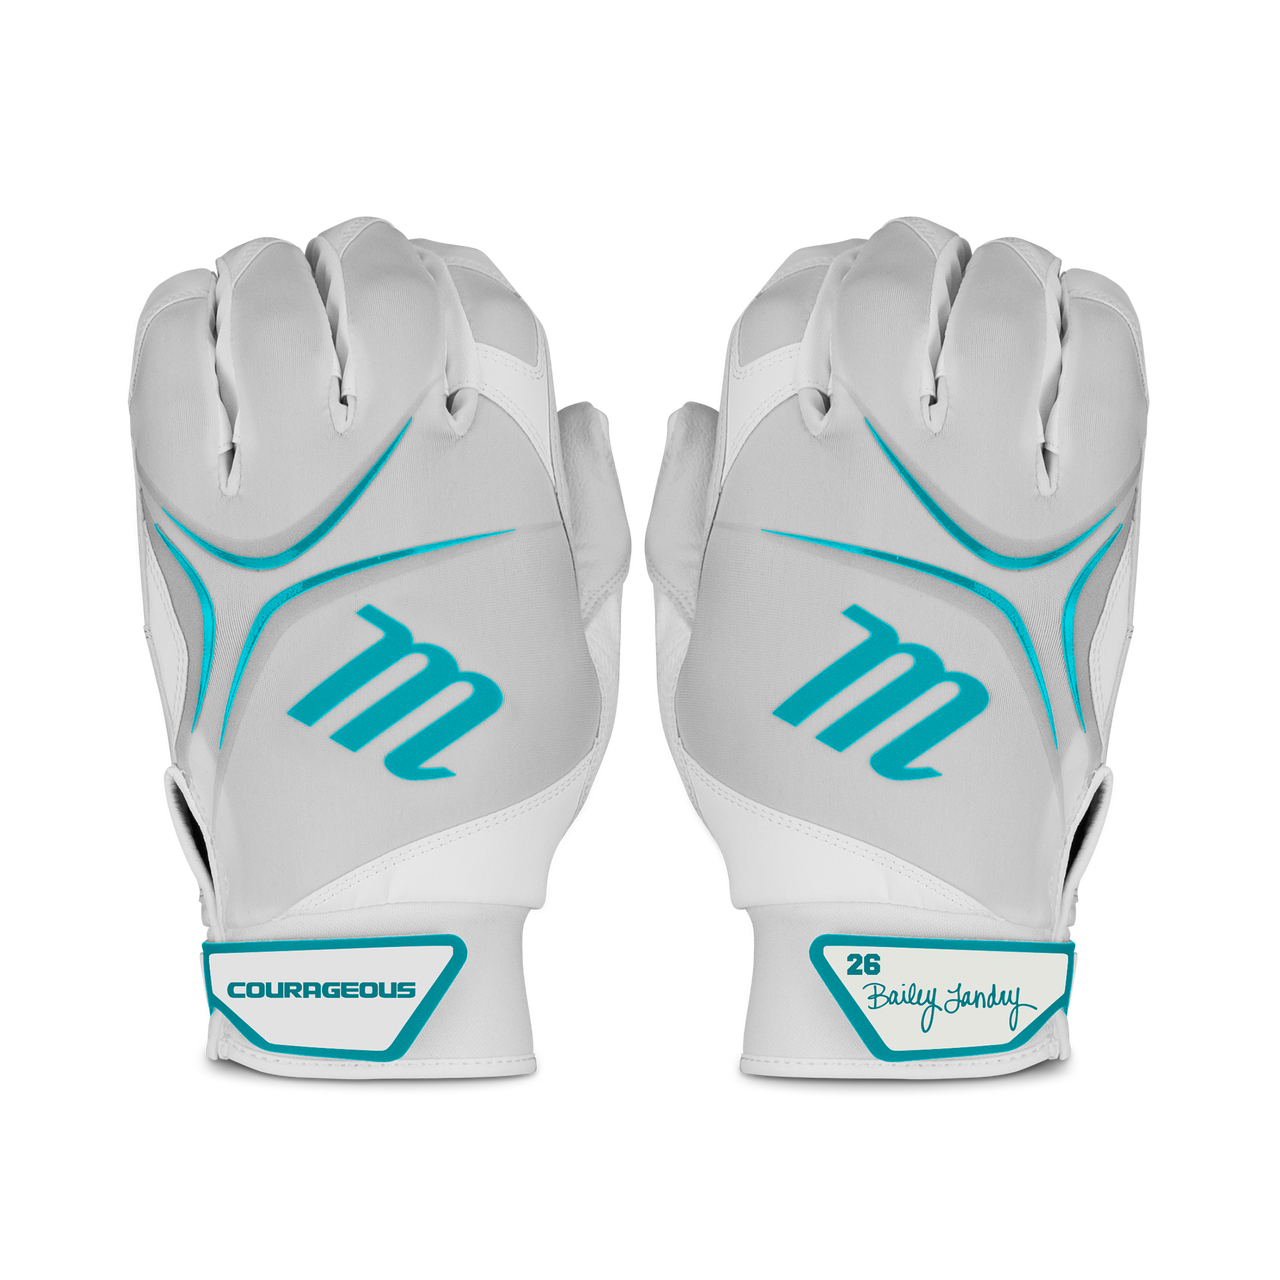 batting gloves for adults